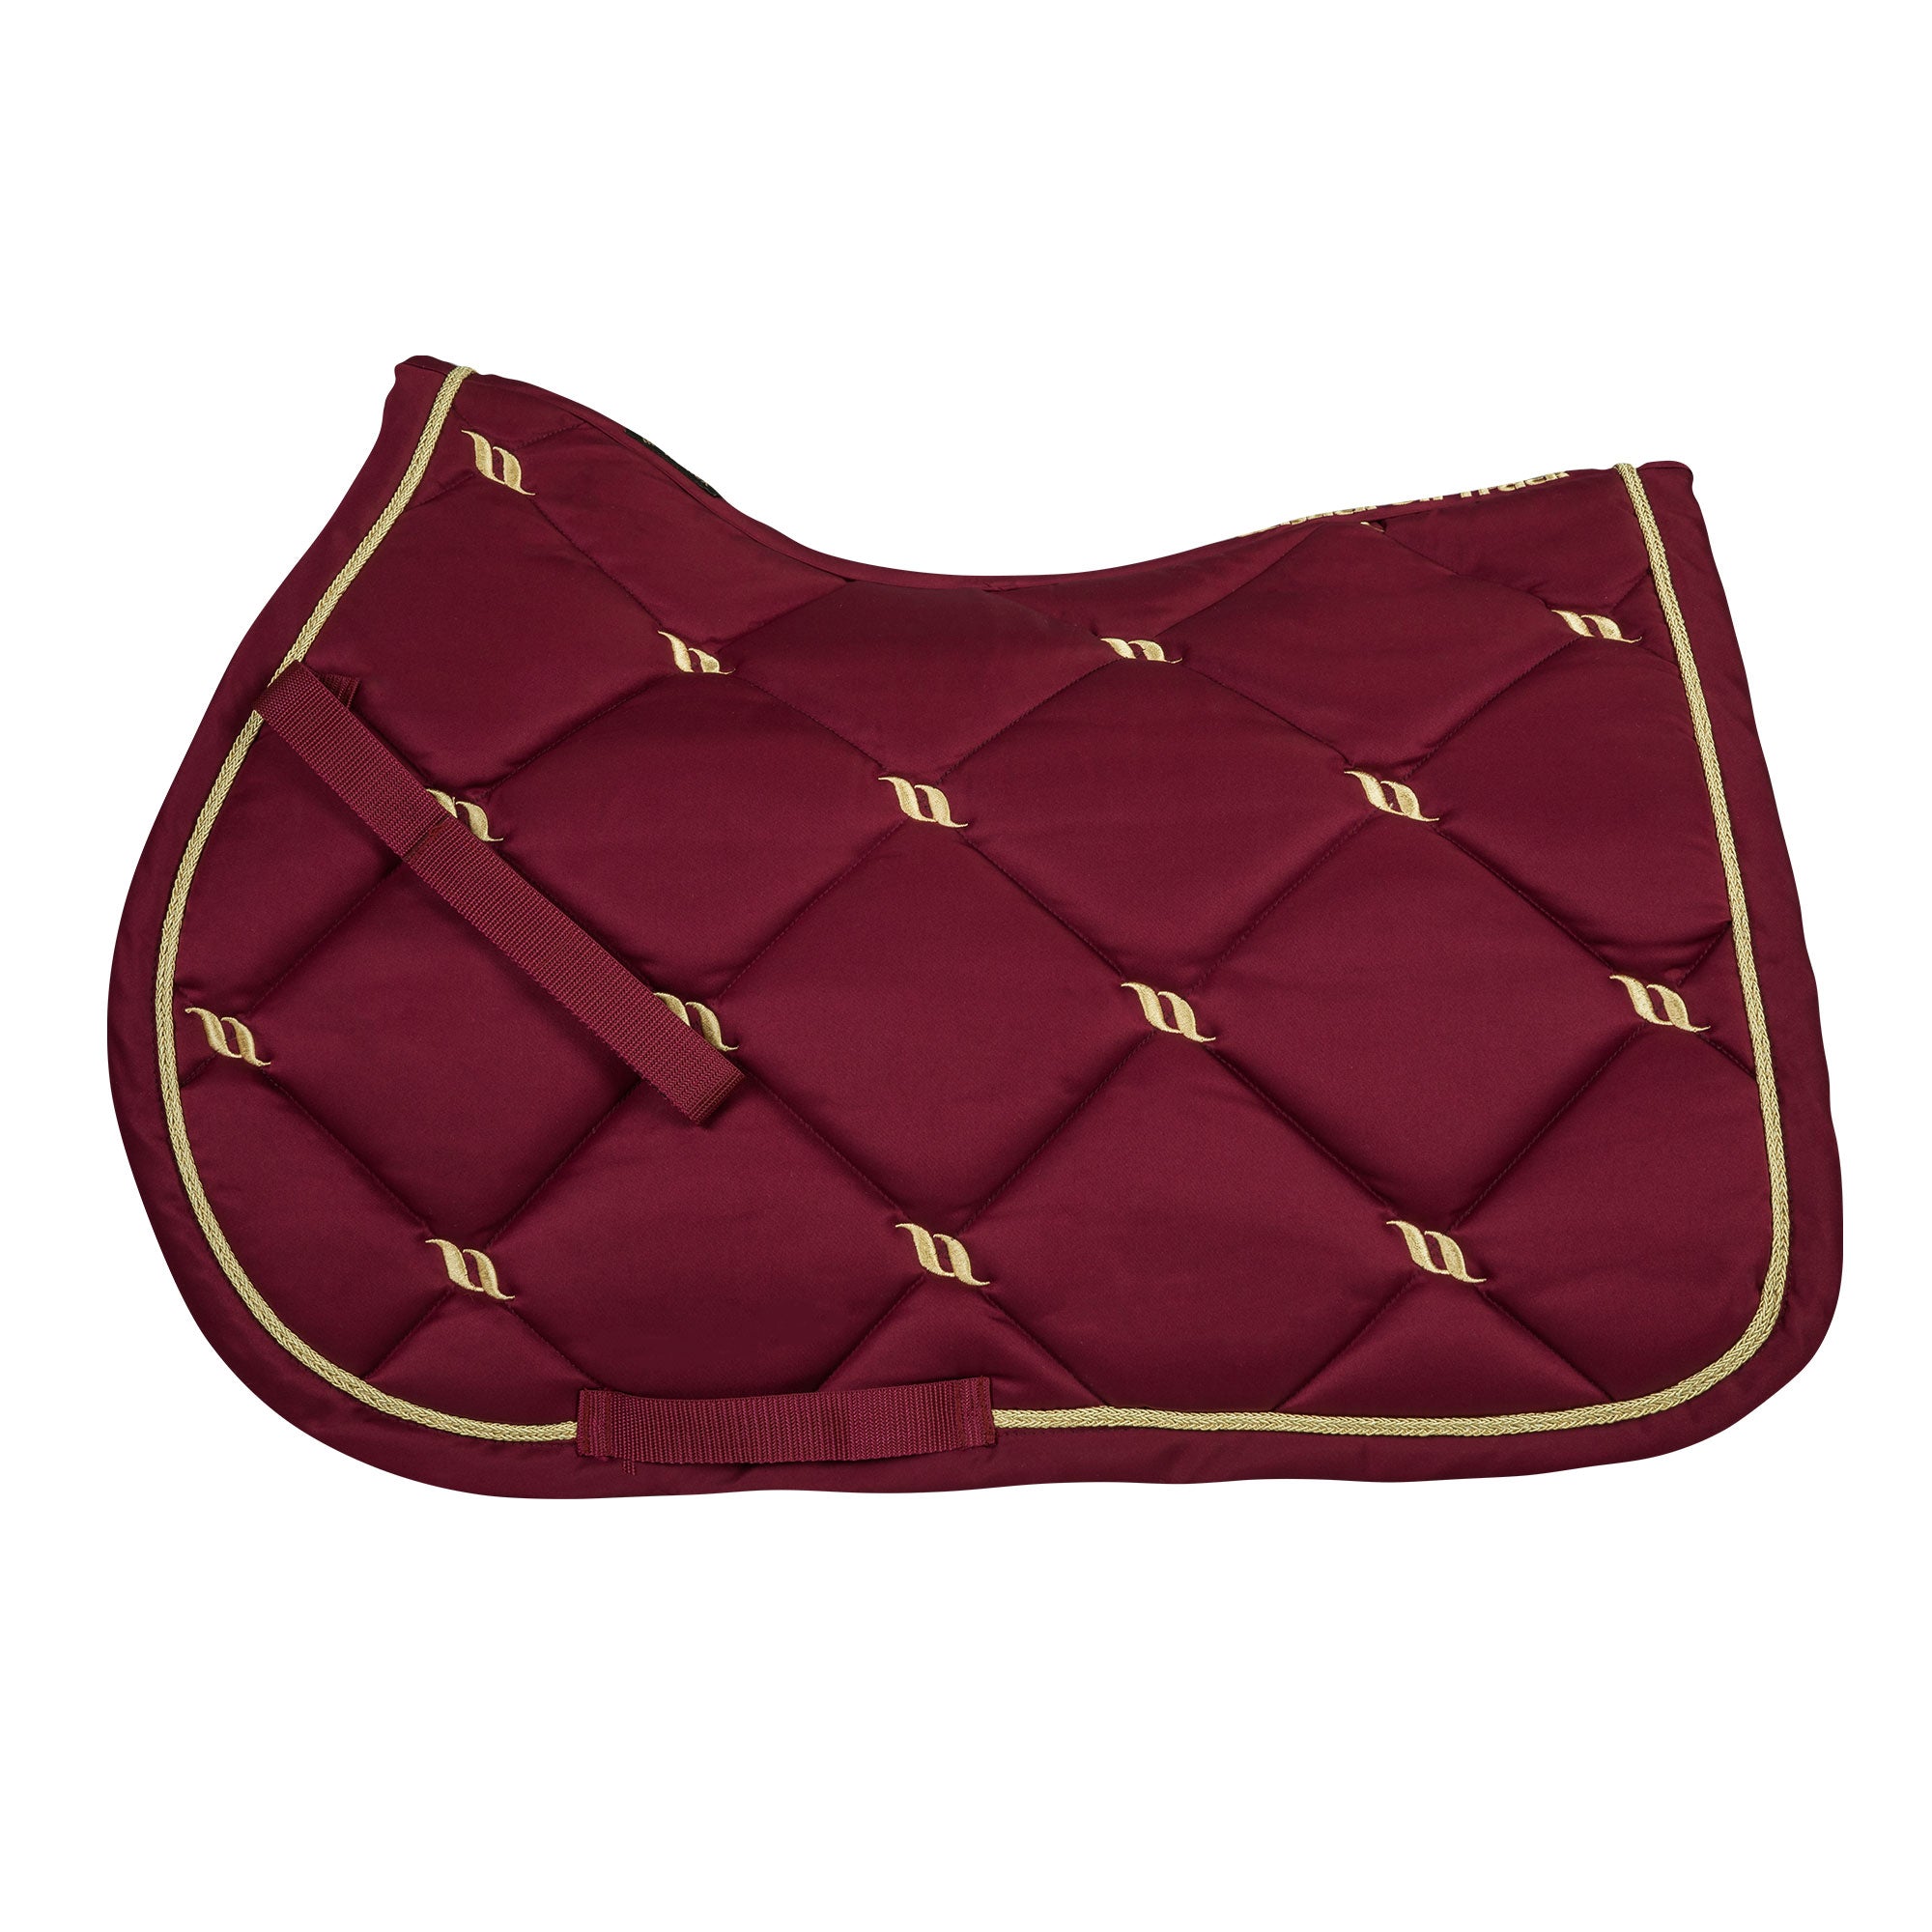 "Nights Collection" Saddle Pad Jumping Dark Red